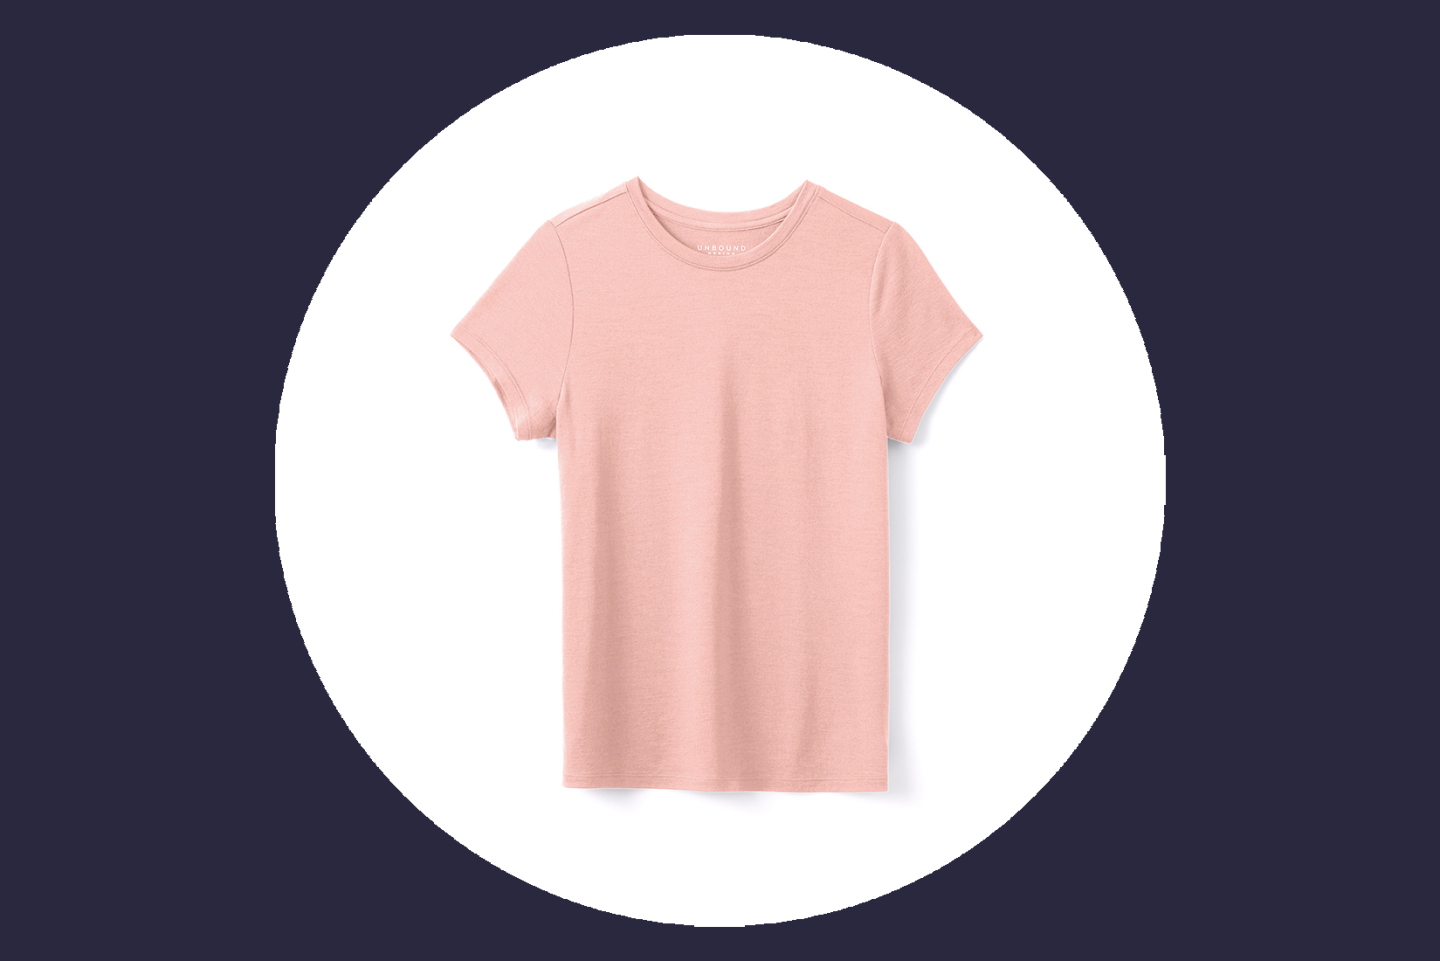 <h2>9. Invest in merino wool</h2> <p>Packing a few pairs of merino wool socks or <a class="Link" href="https://www.afar.com/magazine/best-travel-t-shirts-for-women" rel="noopener">T-shirts</a> is also a great idea; thanks to wool fiber’s <a class="Link" href="https://www.outsideonline.com/outdoor-gear/clothing-apparel/how-long-does-it-take-make-wool-shirt-really-stink/" rel="noopener">hydrophobic properties</a>, B.O. particles have a hard time absorbing into wool clothing, so you can wear them multiple times before you need to wash them.</p> <h2>10. Bring a carabiner</h2> <p>Even the most dedicated <a class="Link" href="https://www.afar.com/magazine/how-to-travel-with-only-one-bag" rel="noopener">one-bag travelers</a> run out of room sometimes. A carabiner clipped to the outside of your bag can be useful; it can hold an extra pair of shoes, a water bottle, a hat, or a jacket.</p>